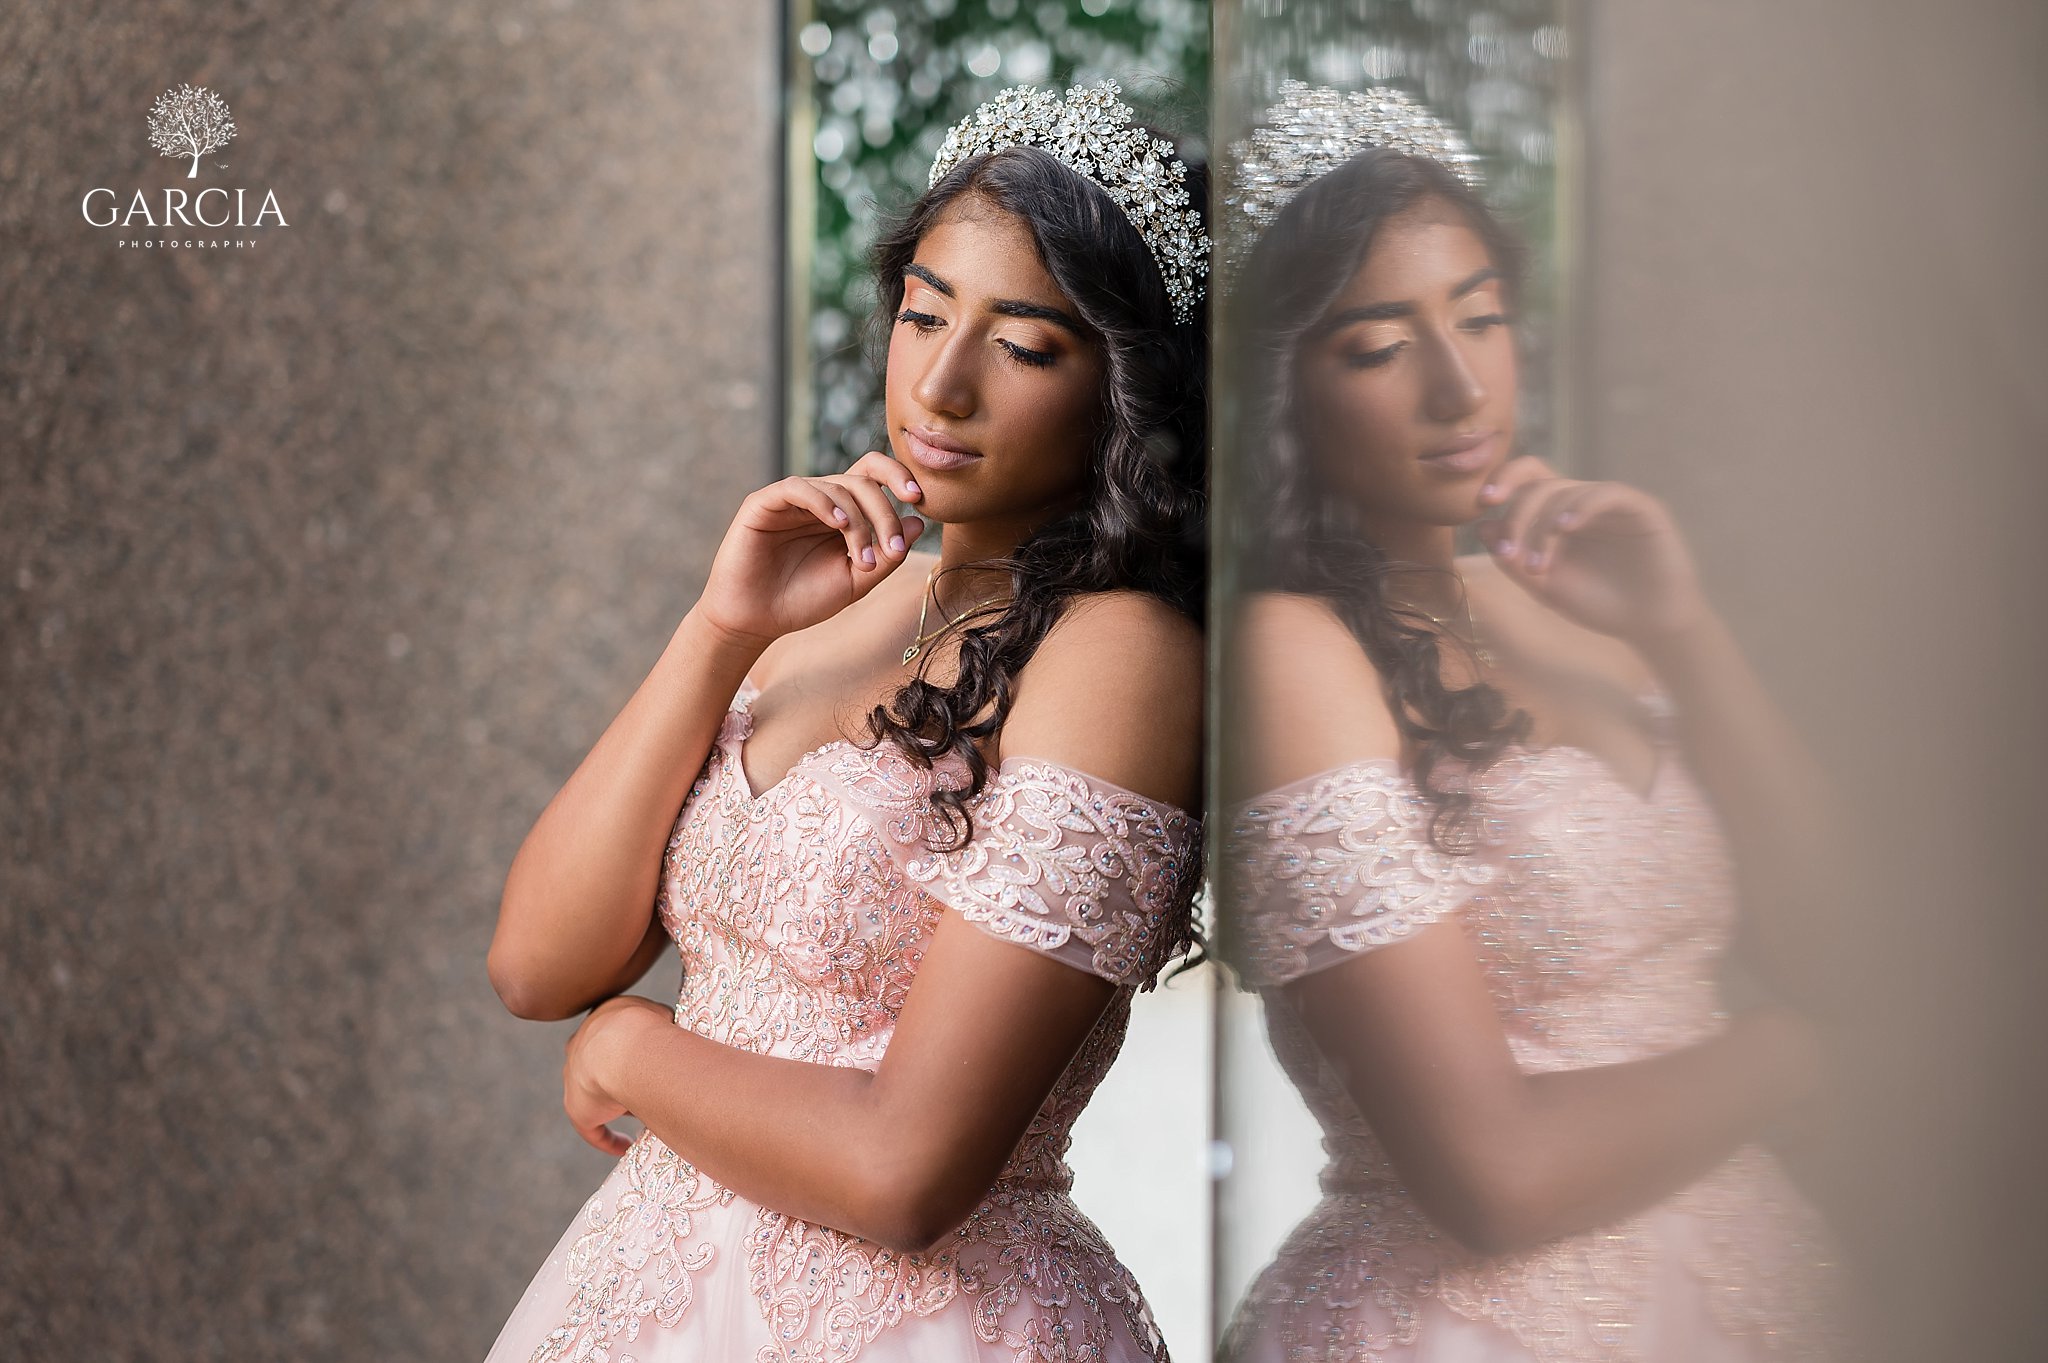 Emily-Quince-Session-Garcia-Photography-7881.jpg